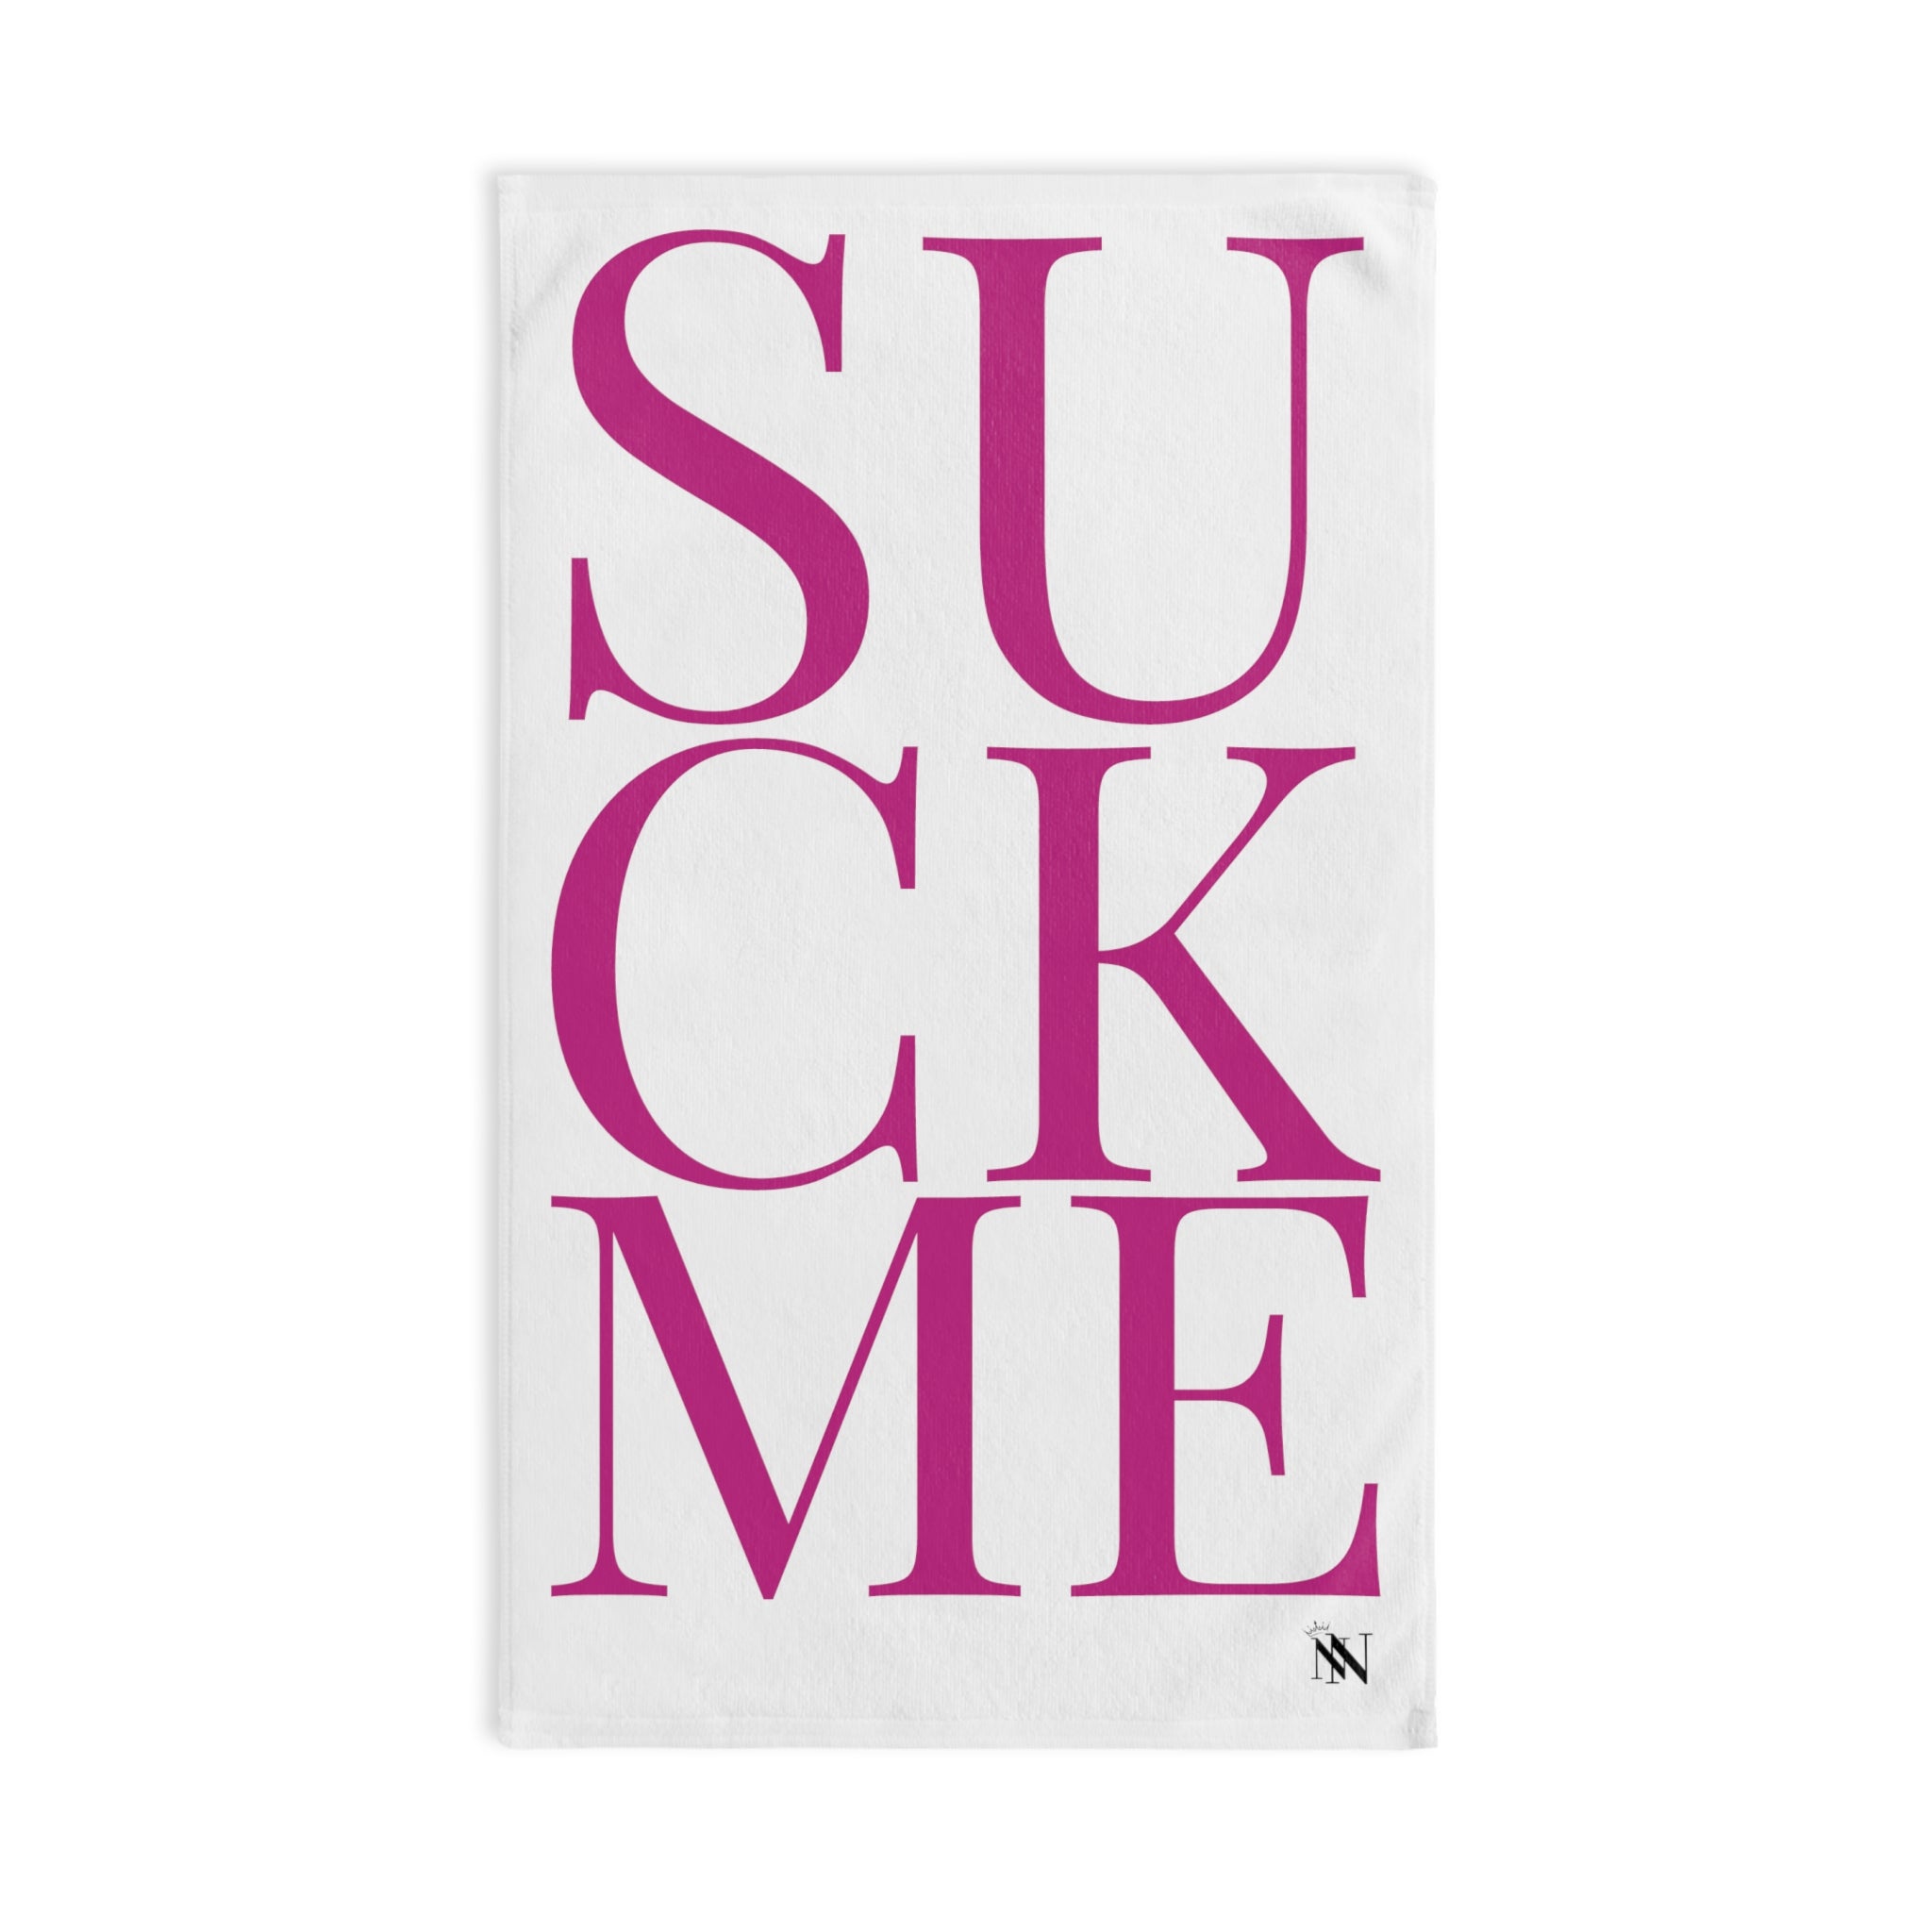 Suck Me FusciaWhite | Funny Gifts for Men - Gifts for Him - Birthday Gifts for Men, Him, Her, Husband, Boyfriend, Girlfriend, New Couple Gifts, Fathers & Valentines Day Gifts, Christmas Gifts NECTAR NAPKINS